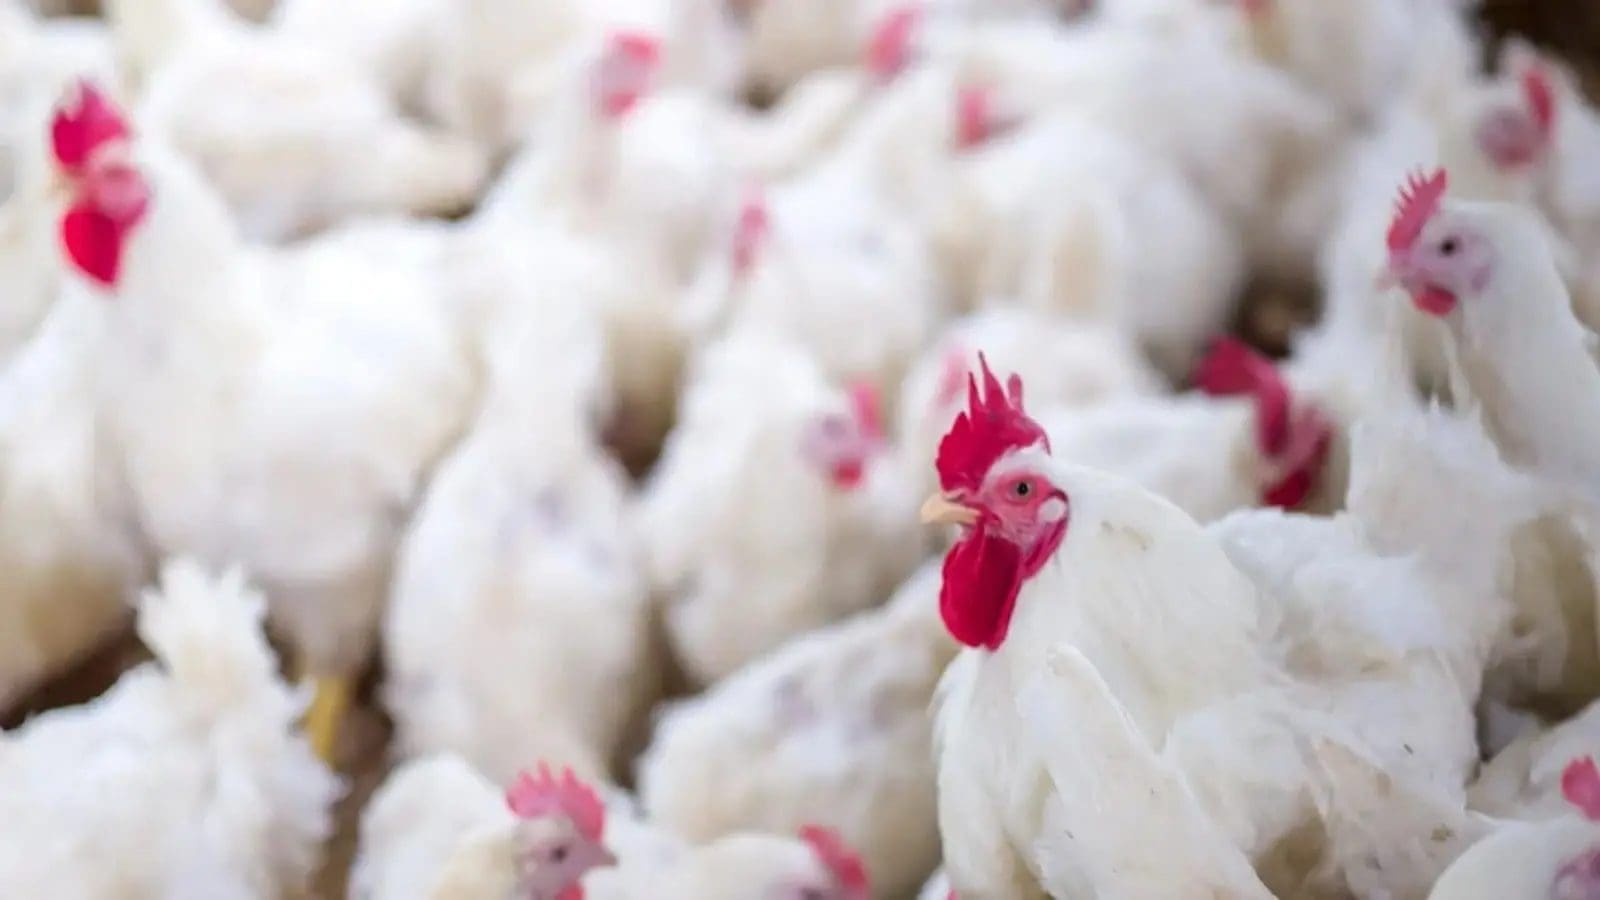 Quantum Foods culls 420,000 birds due to avian flu outbreak, warns of potential egg supply crunch